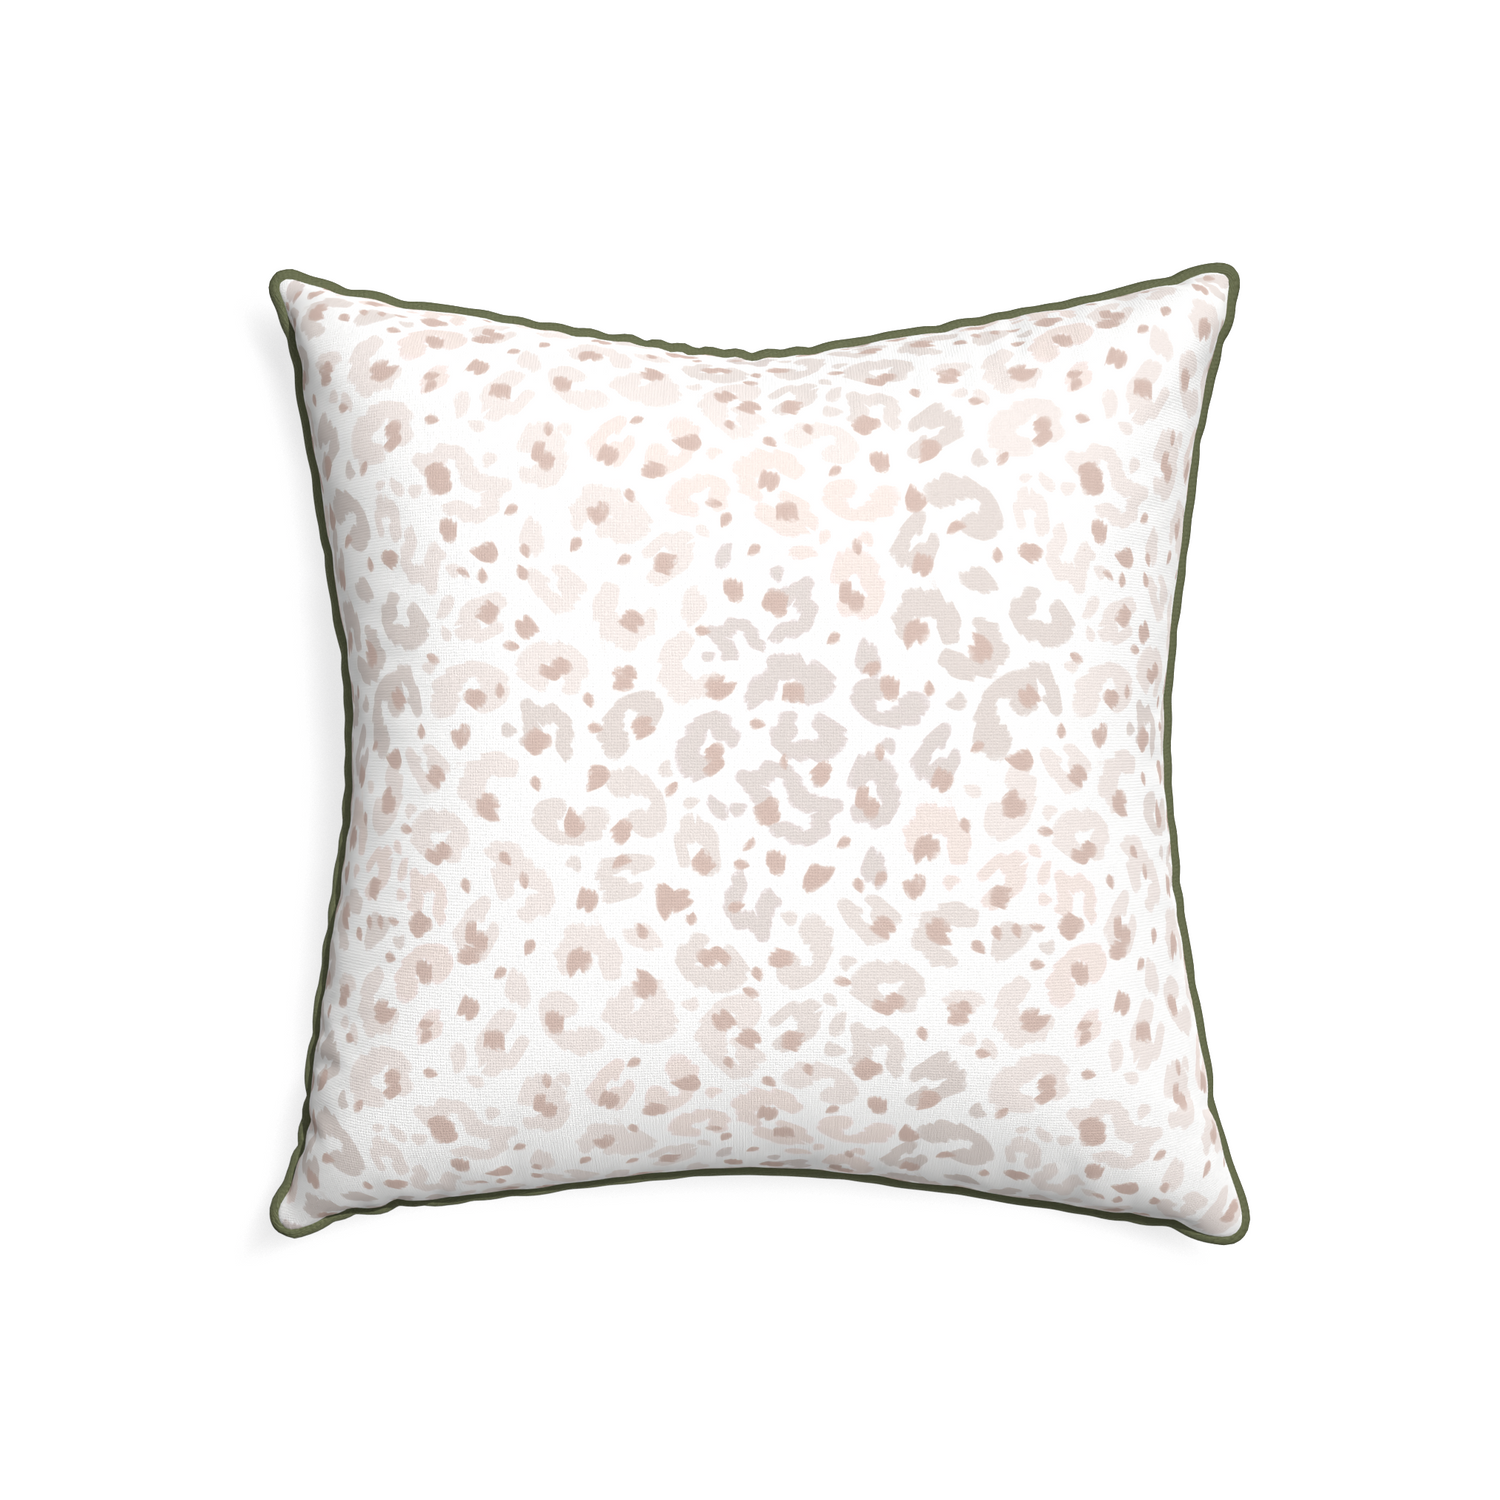 22-square rosie custom pillow with f piping on white background